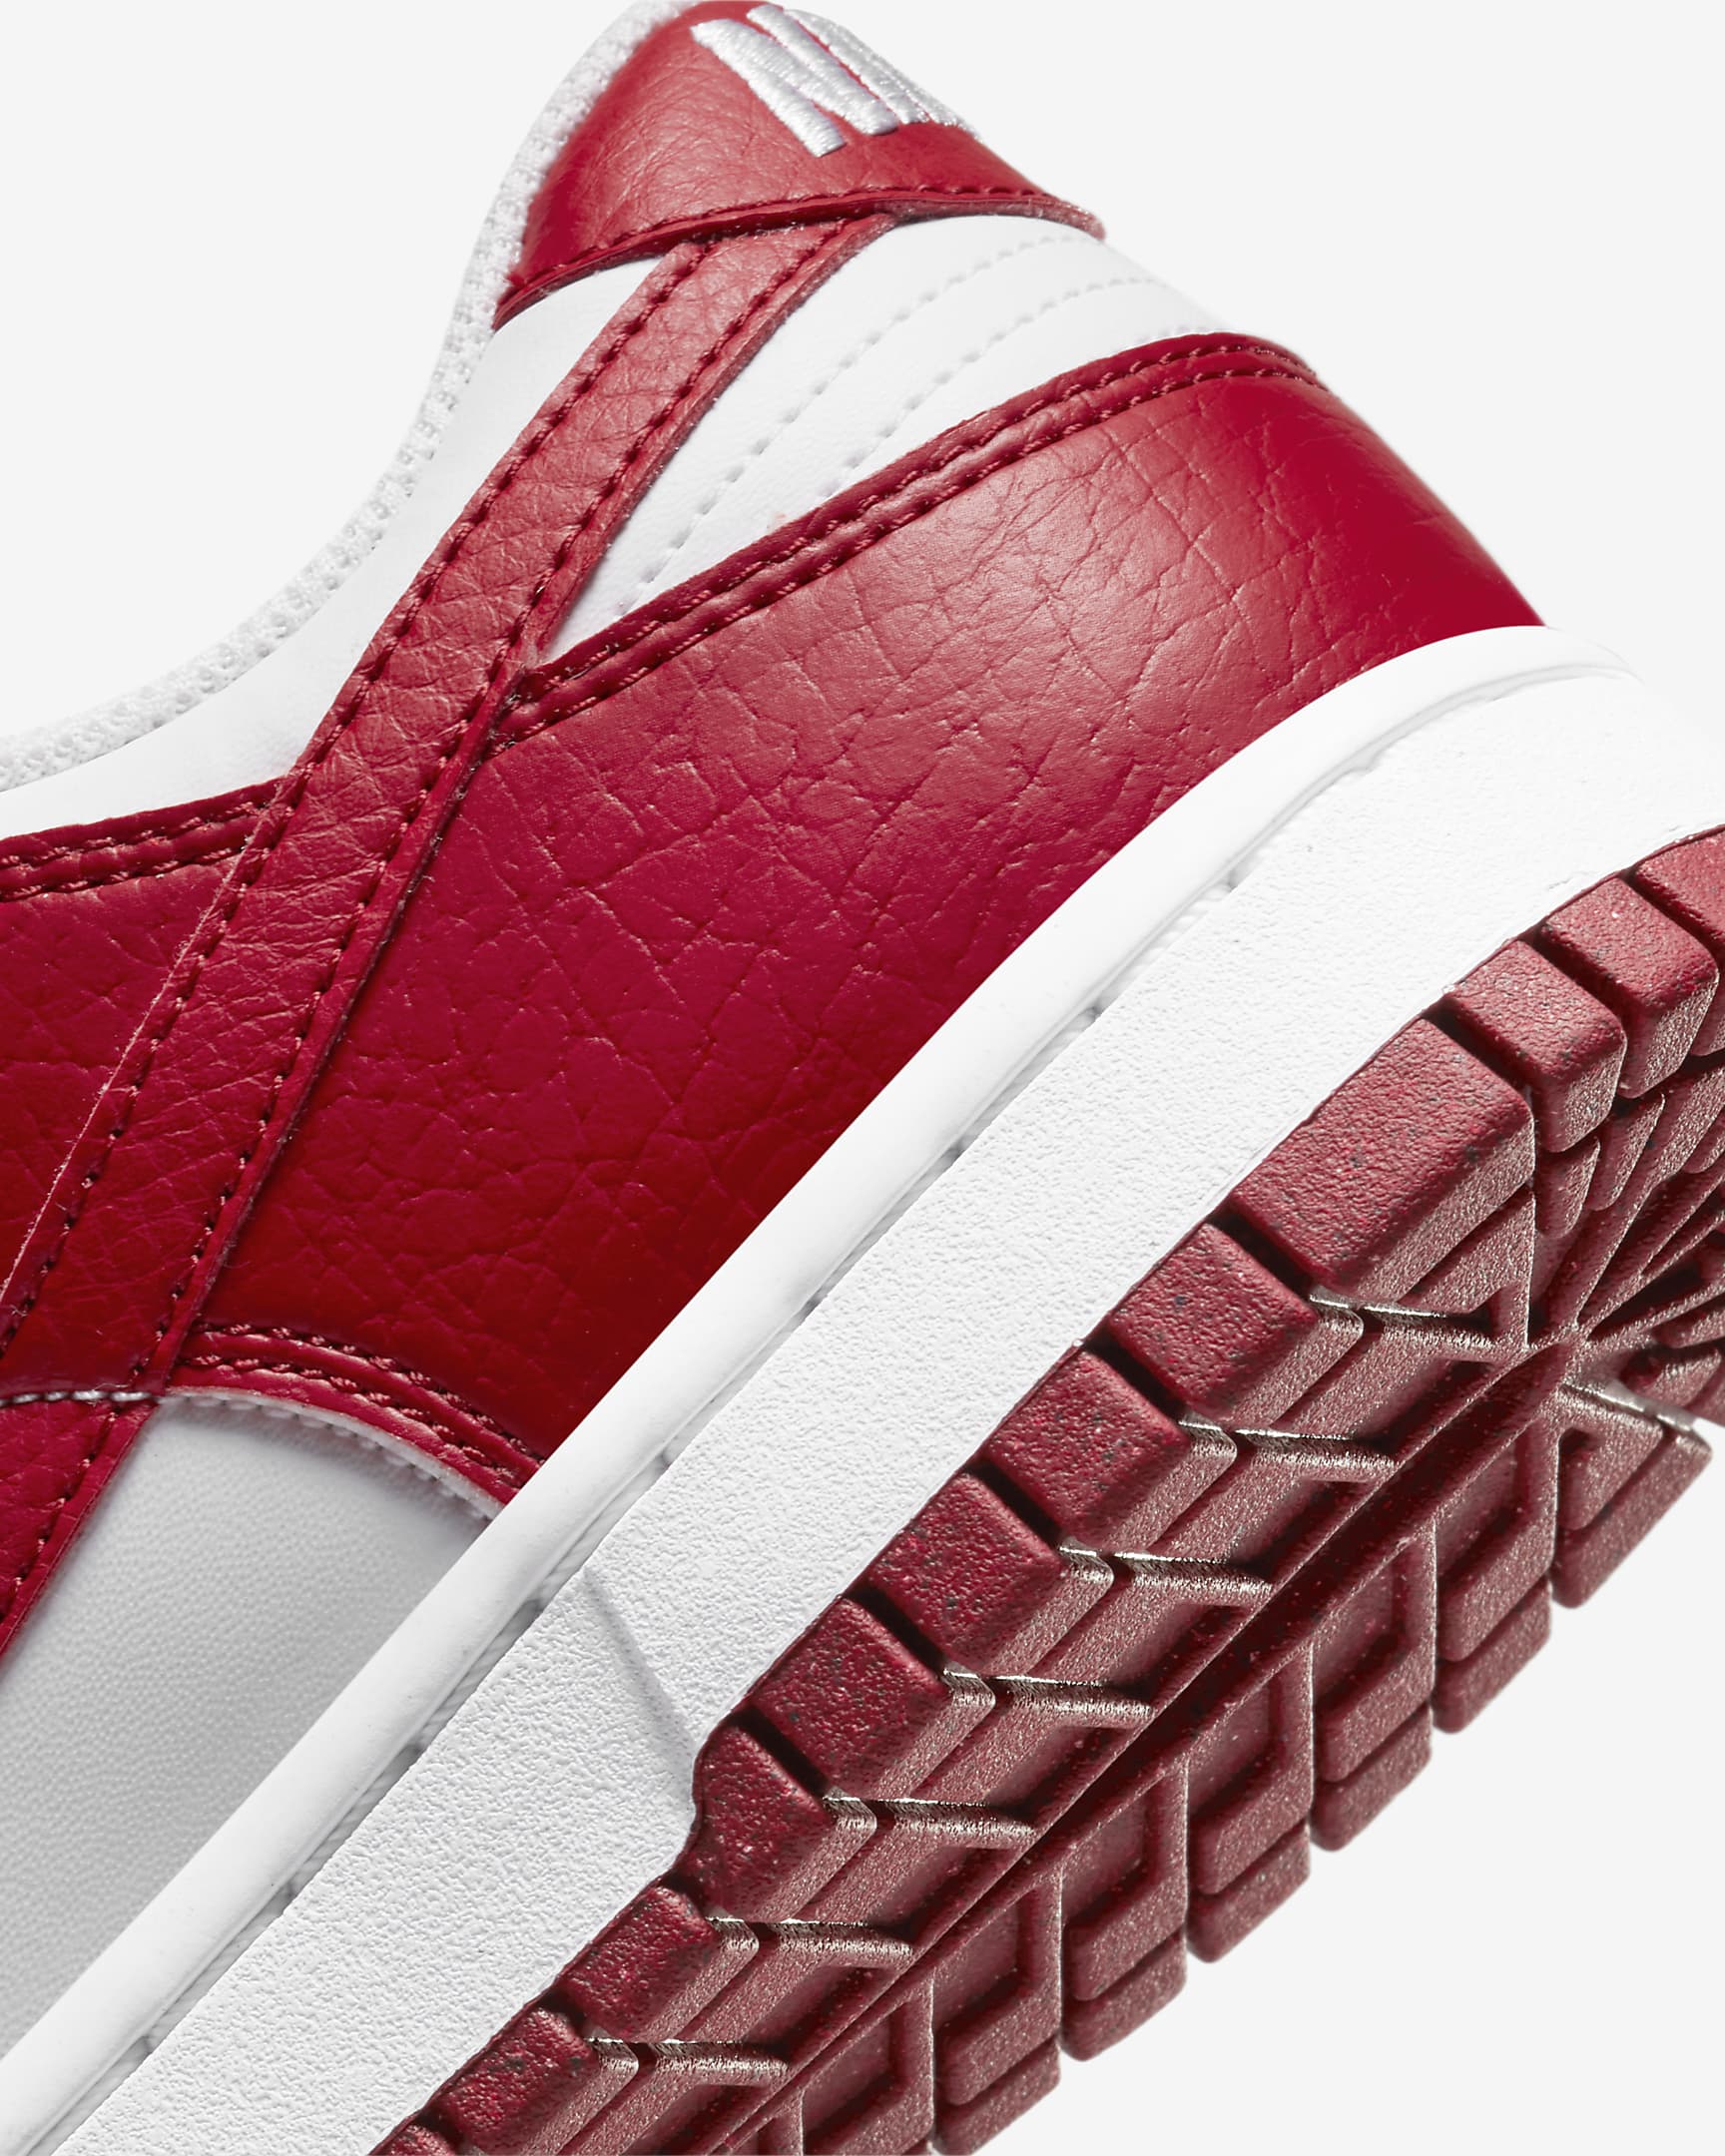 Nike Dunk Low Next Nature Women's Shoes - White/Gym Red